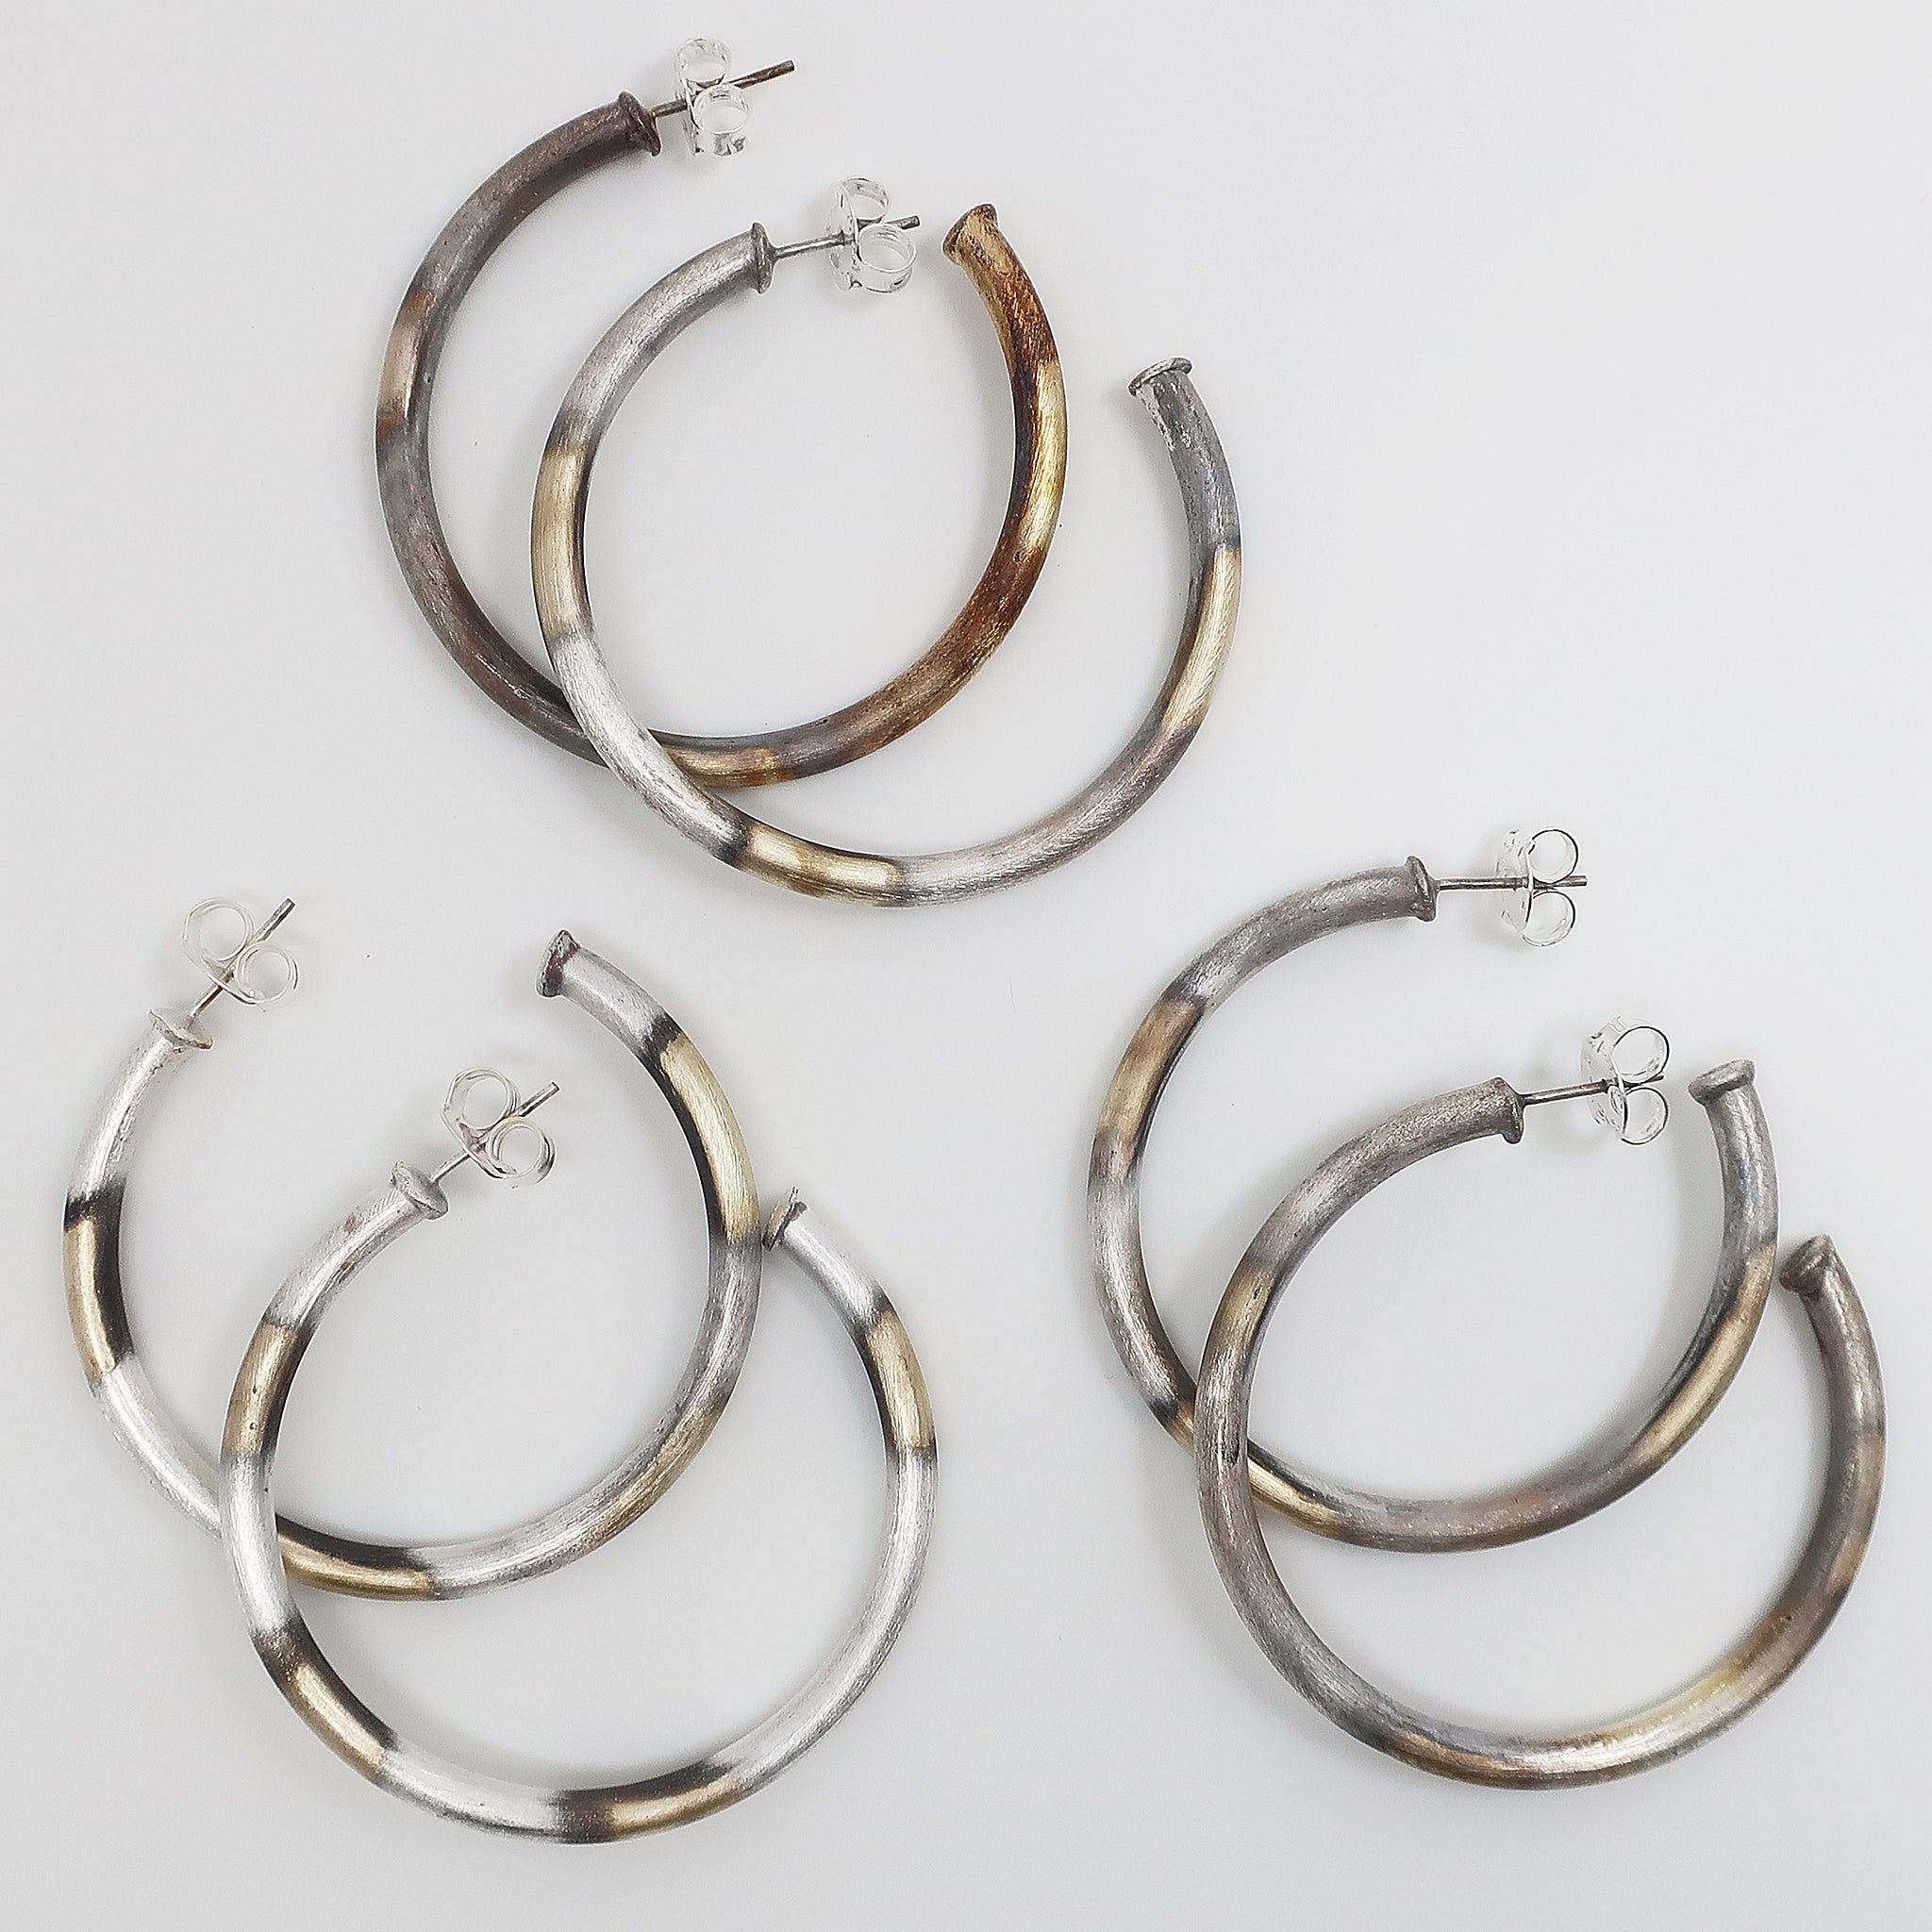 Sheila Fajl Small Everybody's Favorite Tubular Hoop Earrings in Burnished Silver Plated